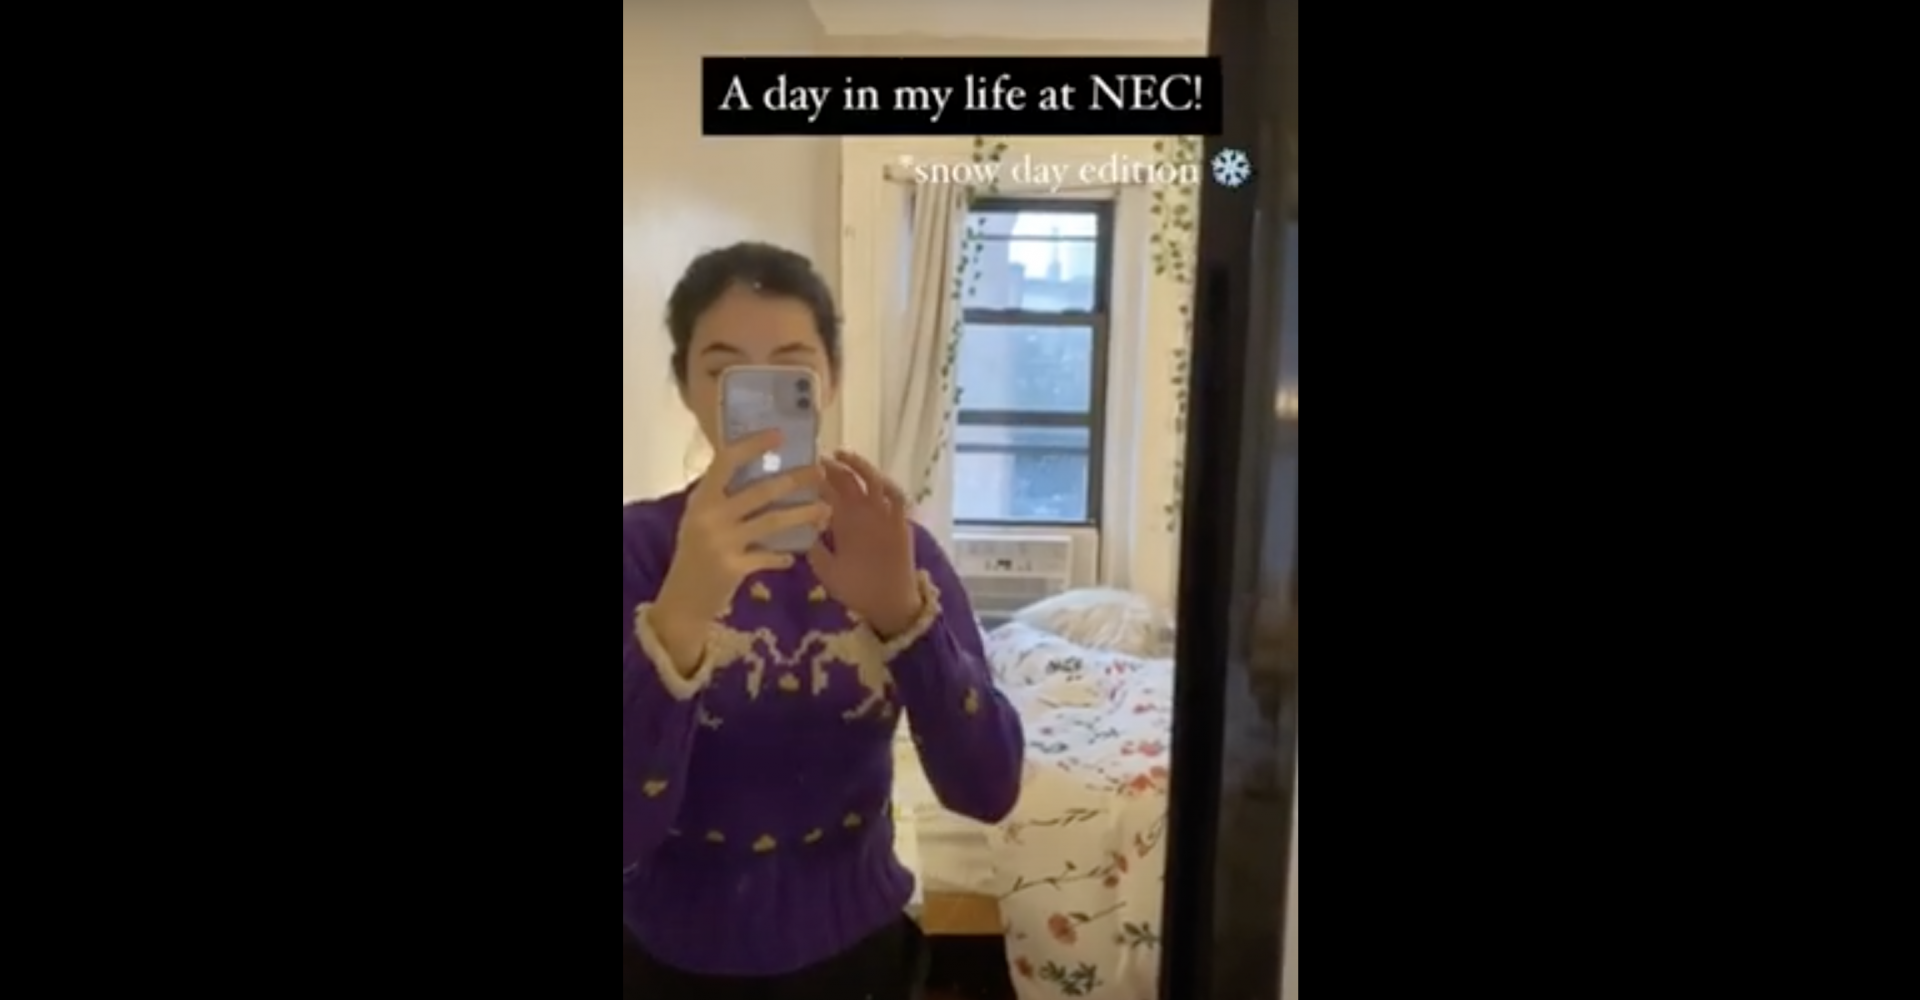 Yi Mei videos herself in the mirror of her room, with snow falling through the window behind her. The text on the screen says "A day in my life at NEC: Snow Day Edition"